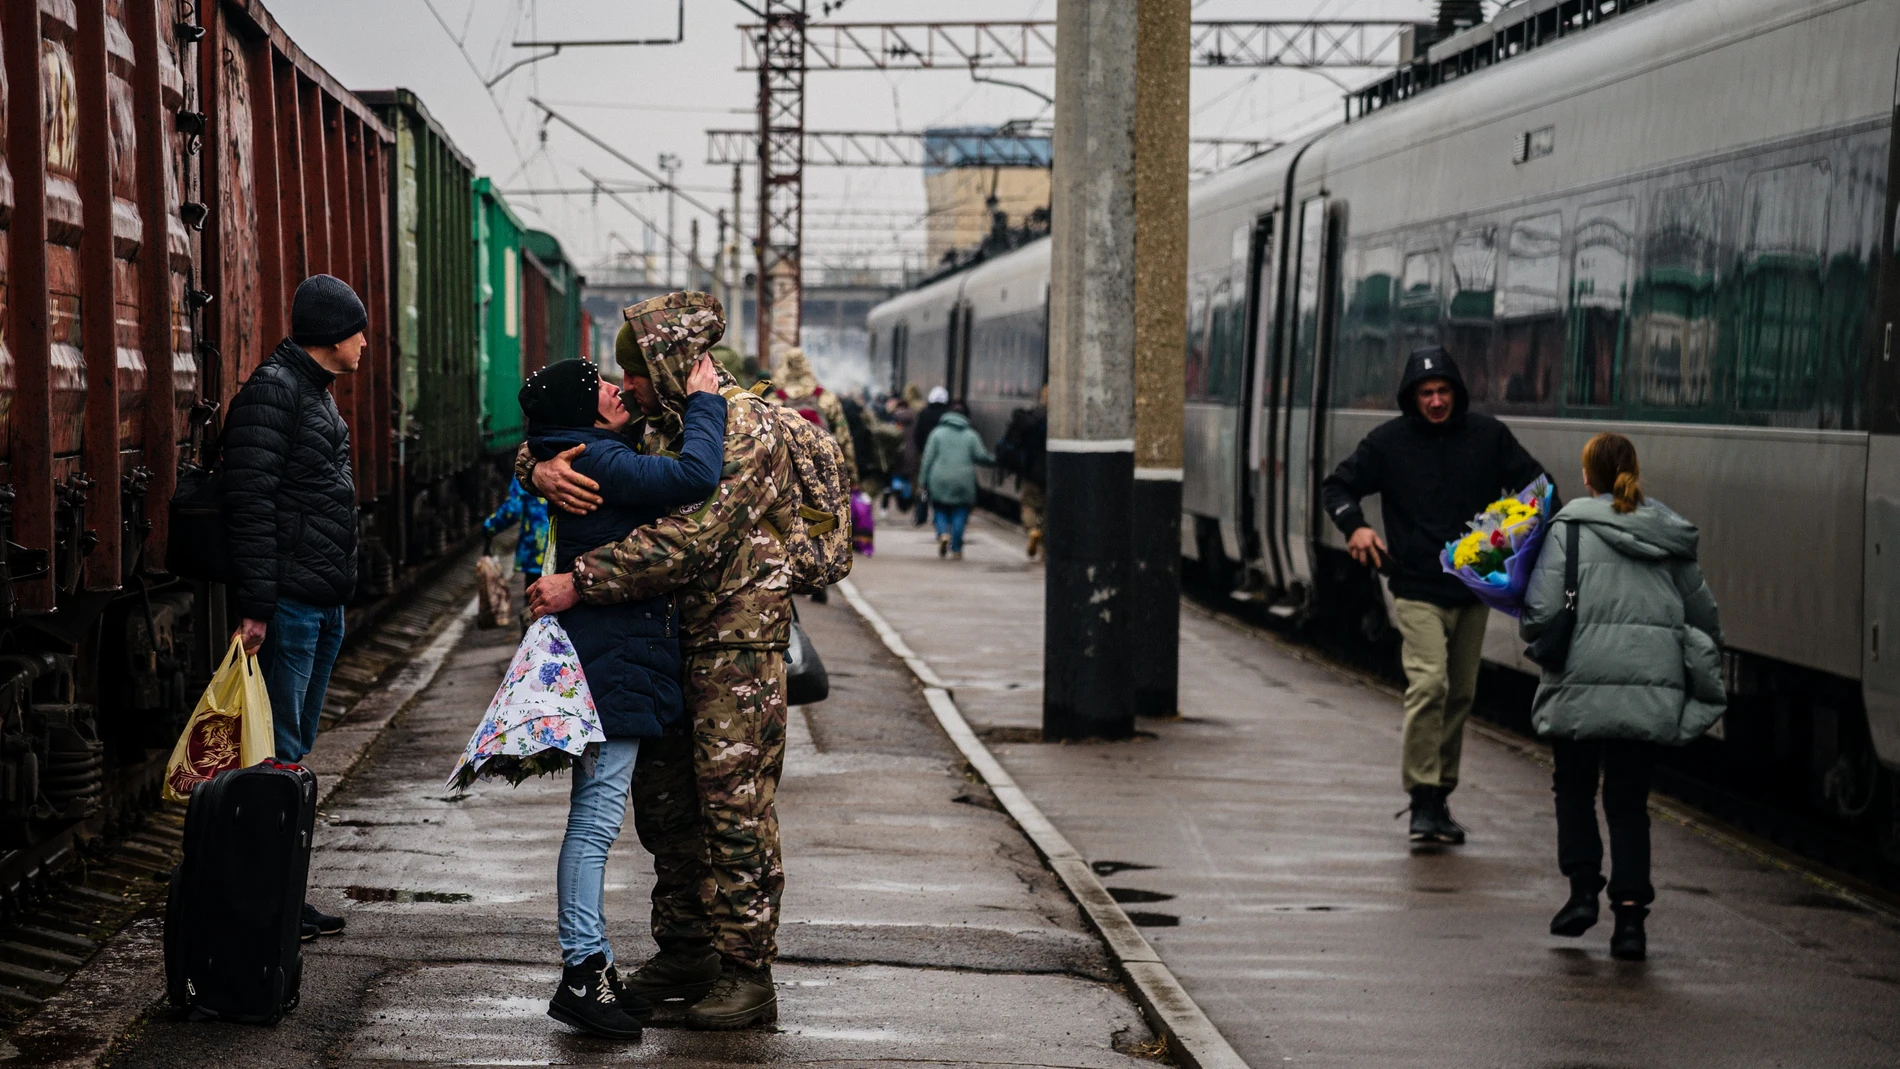 A Ukrainian serviceman embraces his wife as she arrives from Kyiv at the train station in Kramatorsk on February 26, 2023, amid the Russian invasion of Ukraine.